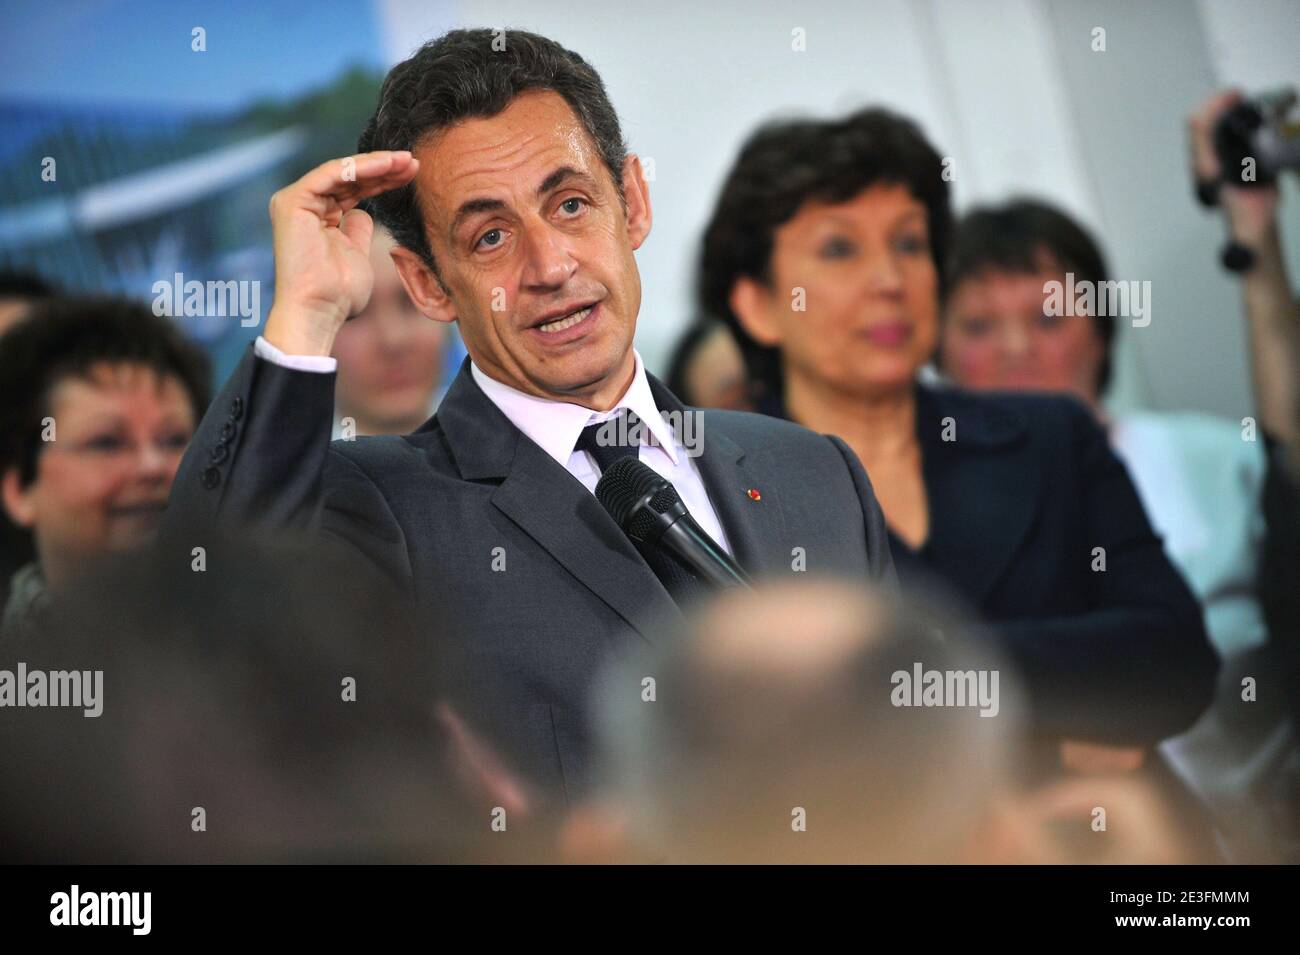 French President Nicolas Sarkozy delivers a speech during a visit at the Rambouillet hospital, suburb of Paris, on March 13, 2009. Photo by Mousse/ABACAPRESS.COM Stock Photo